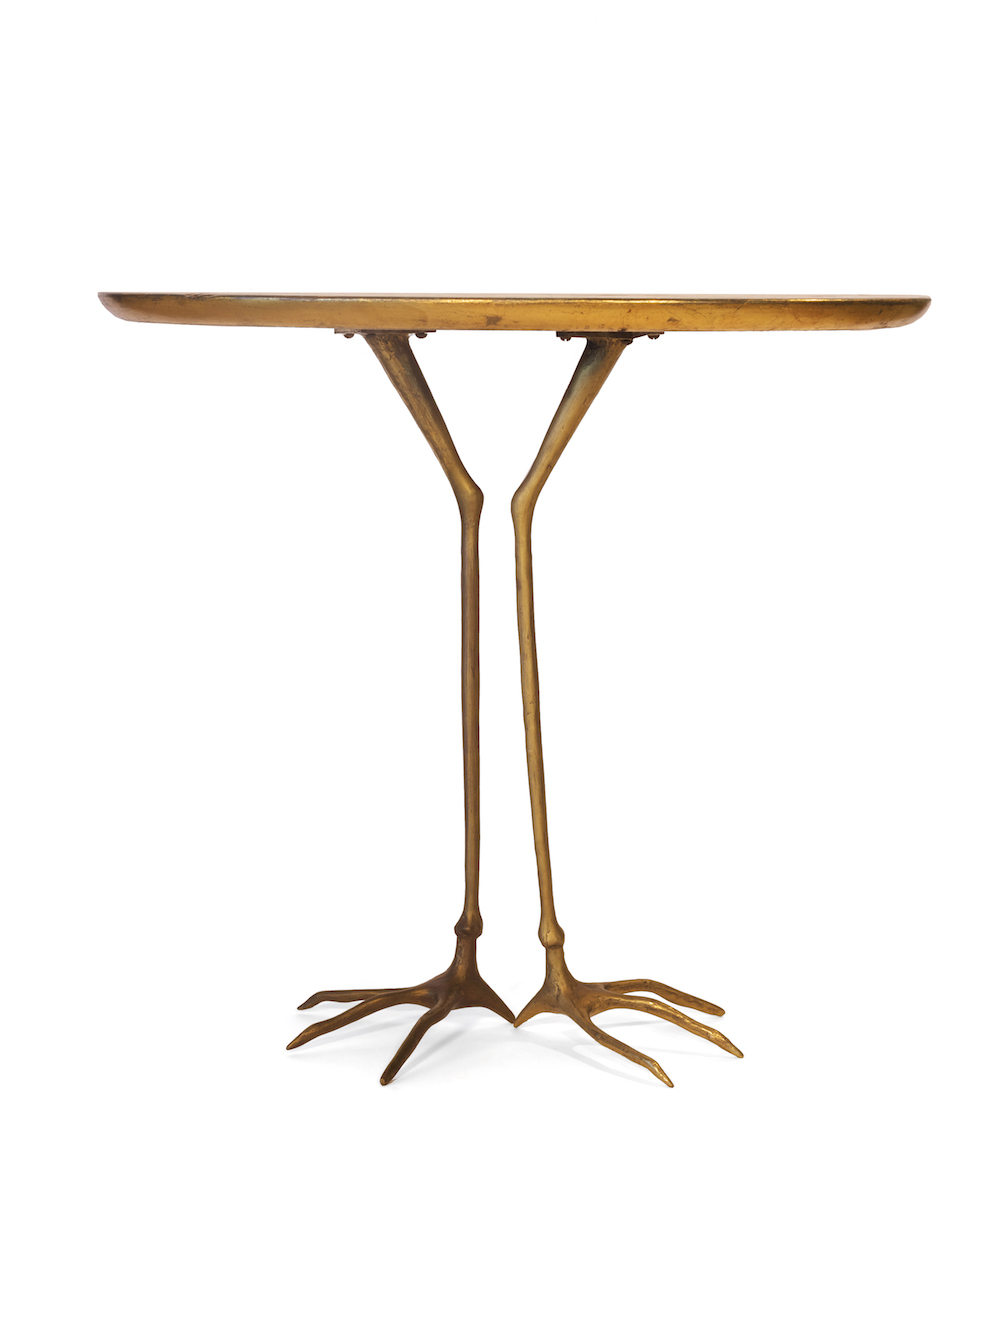 Surrealist sculpture and functional occasional table shown from the side, the work features realistic cast bronze crane legs holding a round wooden, gold-plated tabletop.